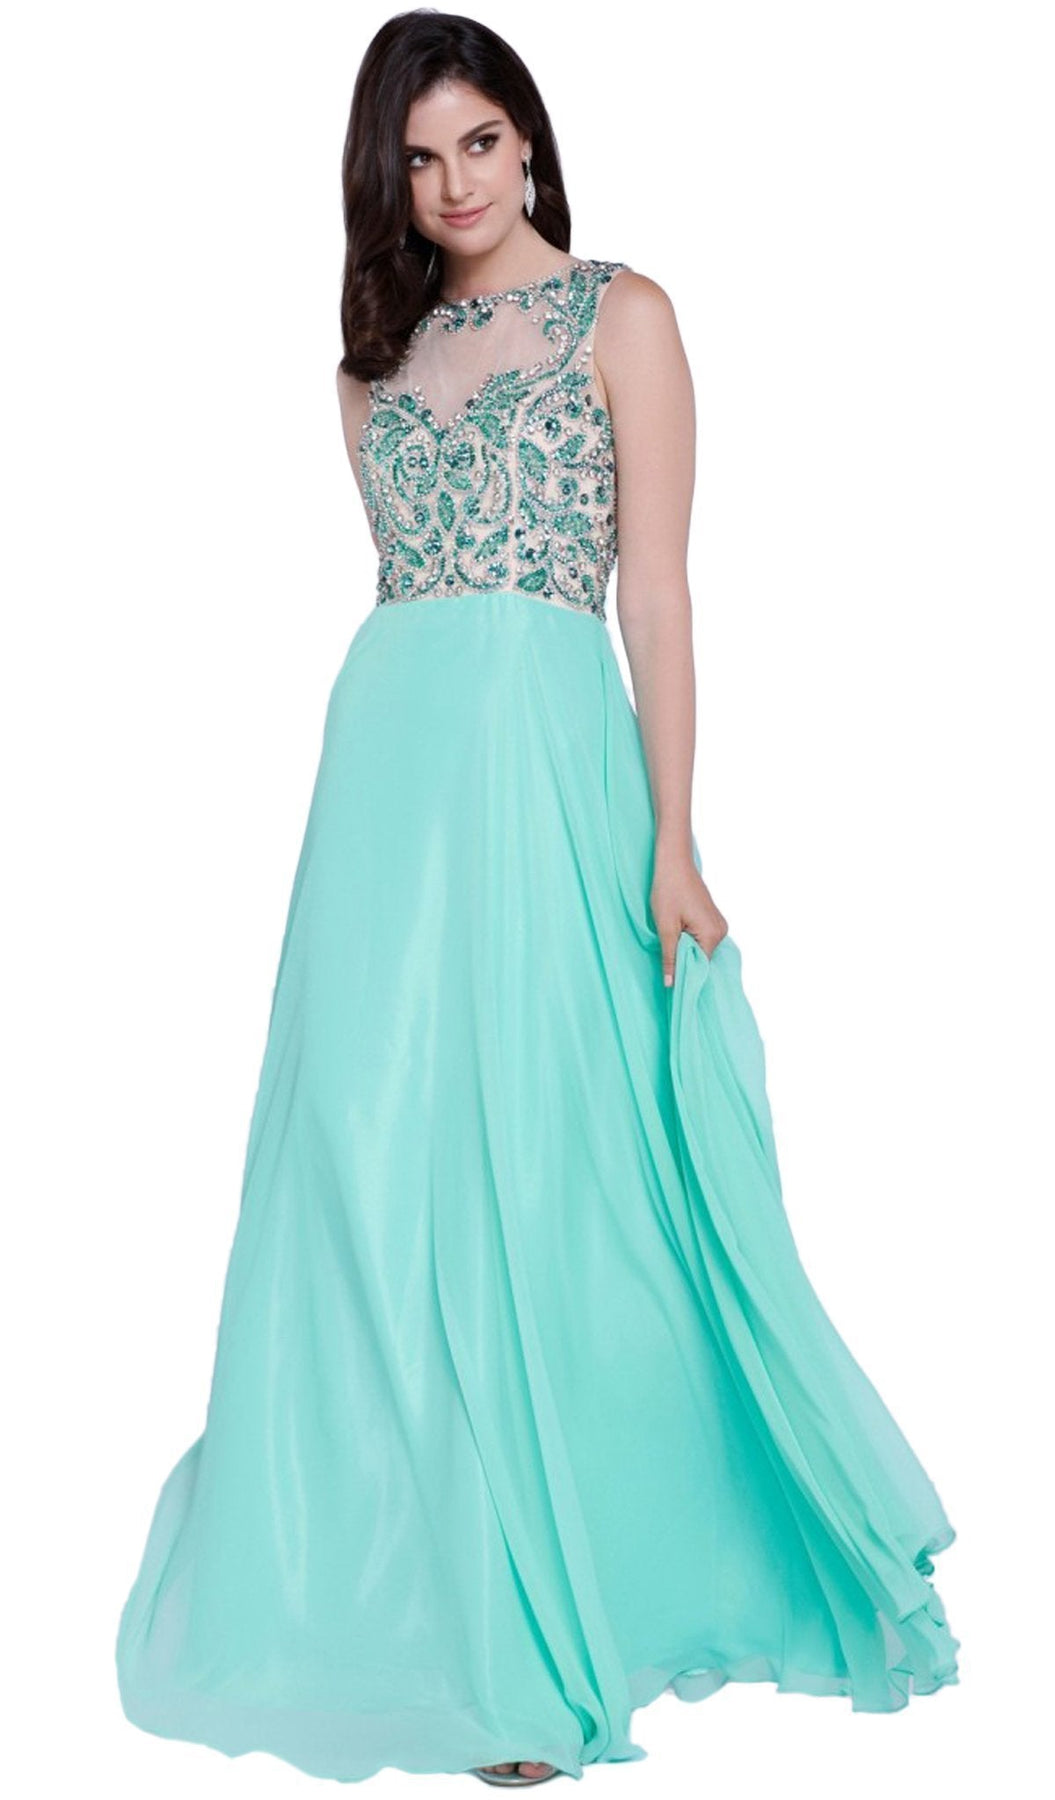 Nox Anabel - 8235 Beaded Embroidery Illusion Evening Gown Special Occasion Dress XS / Mint Green